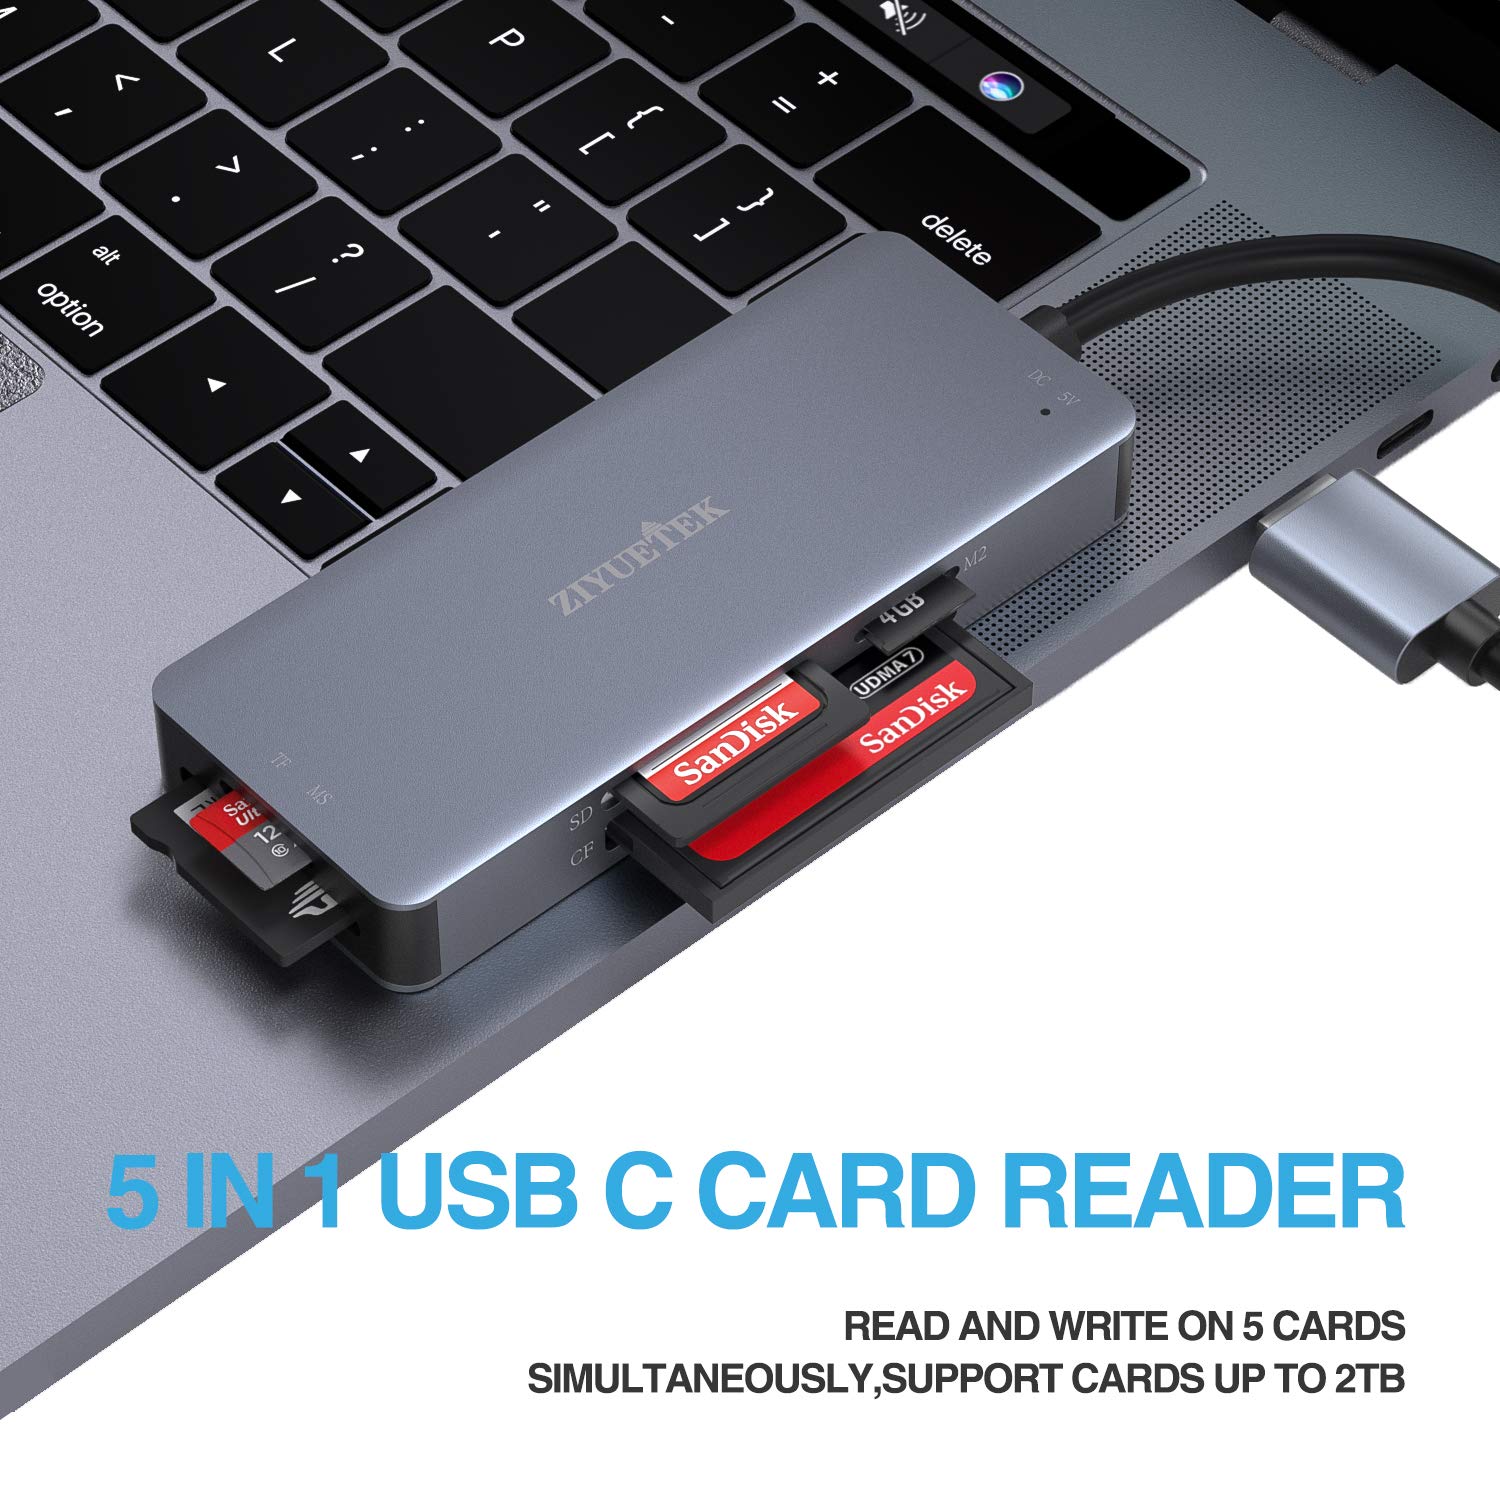 CF Card Reader,USB 3.0 to Compact Flash Memory Card Reader Adapter 5Gbps Read 5 Cards Simultaneously for SDXC, SDHC, SD, Micro SDXC, Micro SD, Micro SDHC, M2, MS, CF and UHS-I Card (Grey)